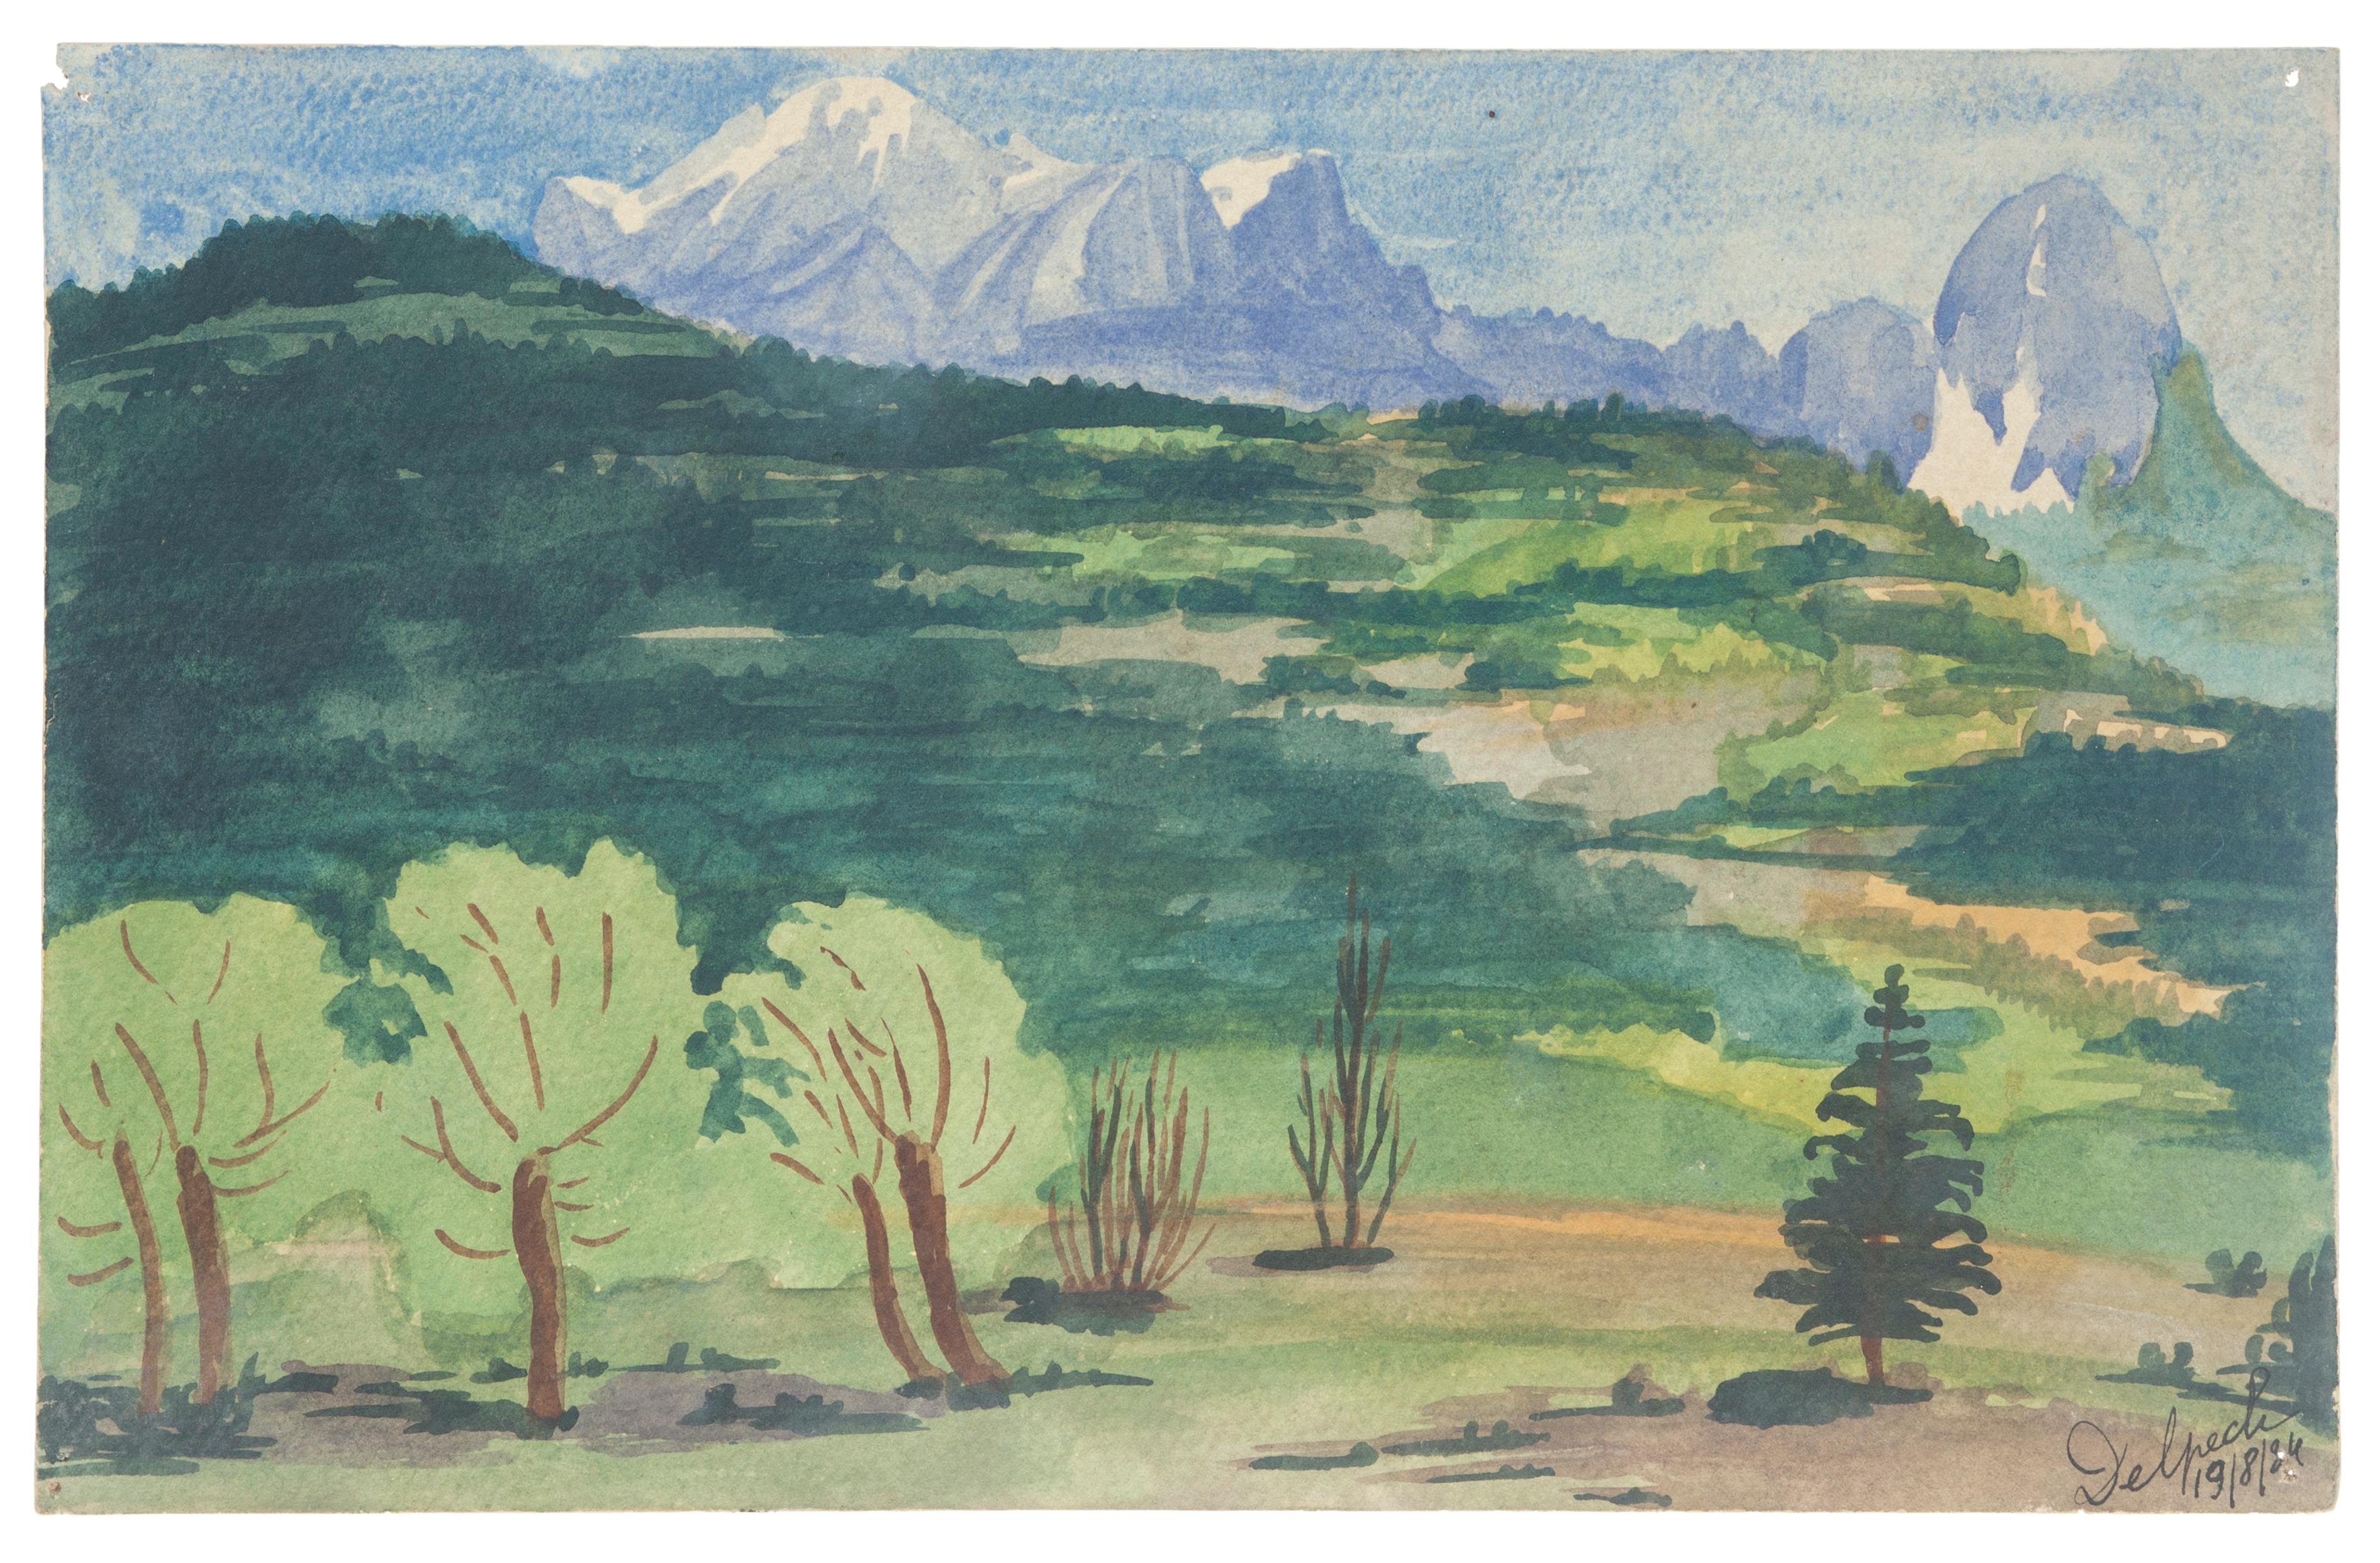 "Landscape" is an original drawing in watercolor on paper, realized by Jean Delpech (1916-1988). 
The state of preservation of the artwork is very good.

Sheet dimension: 14.8 x 23.4 cm.

The artwork represents beautiful landscape with vivid color,